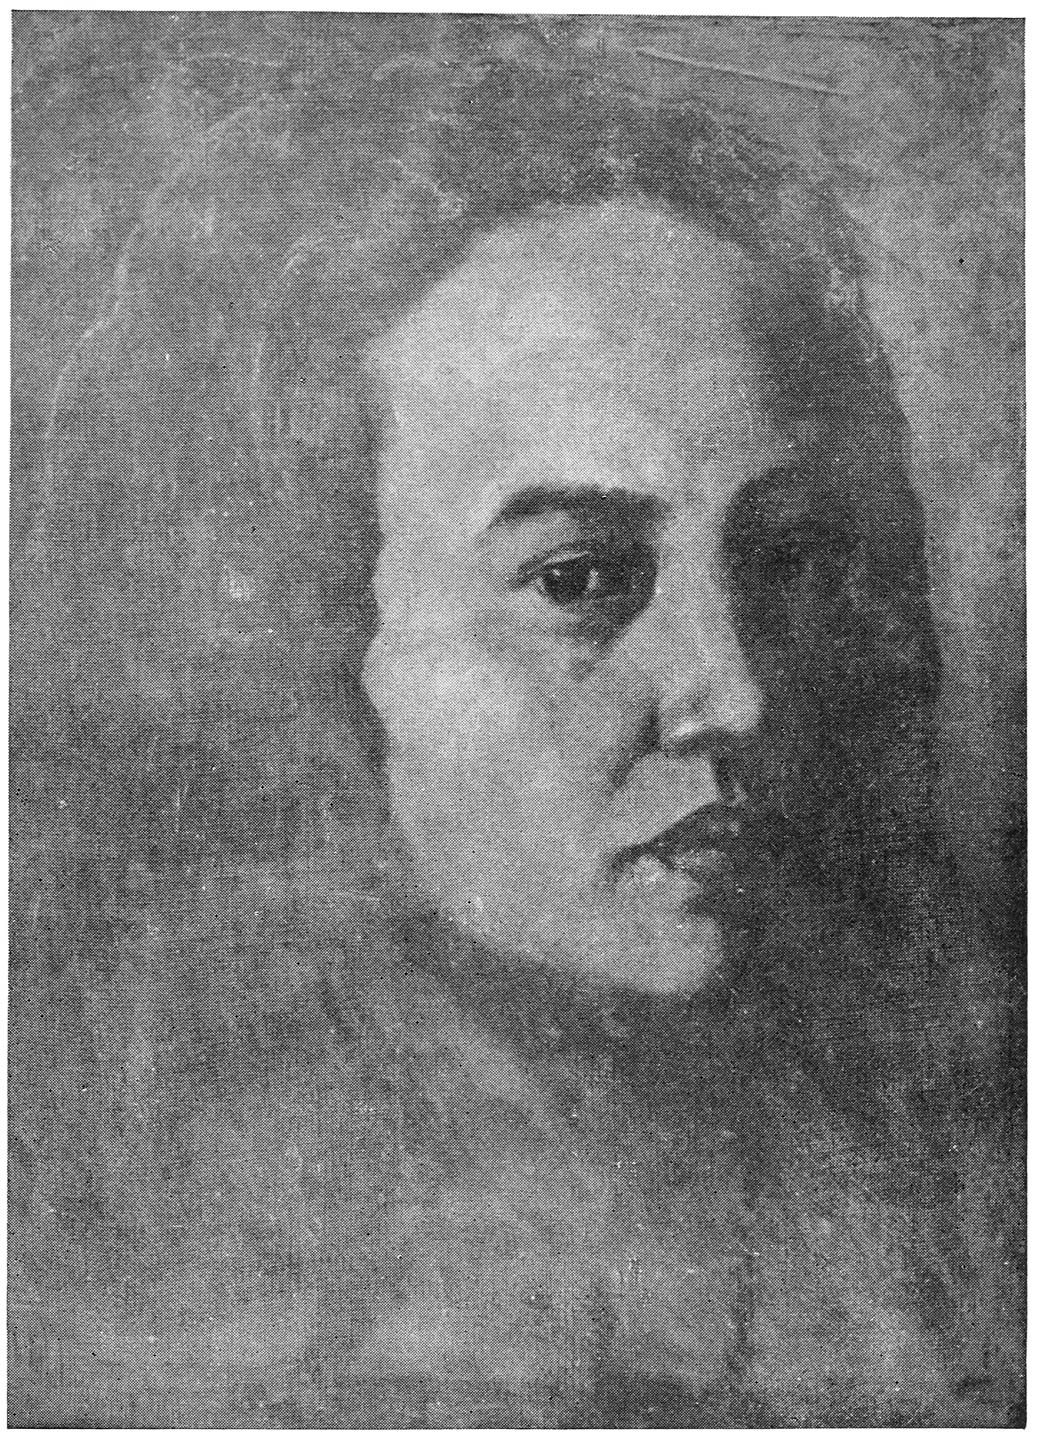 PHOTOGRAPH OF AN OIL PAINTING OF HIS SISTER BY RIZAL—MISS SATURNINA RIZAL